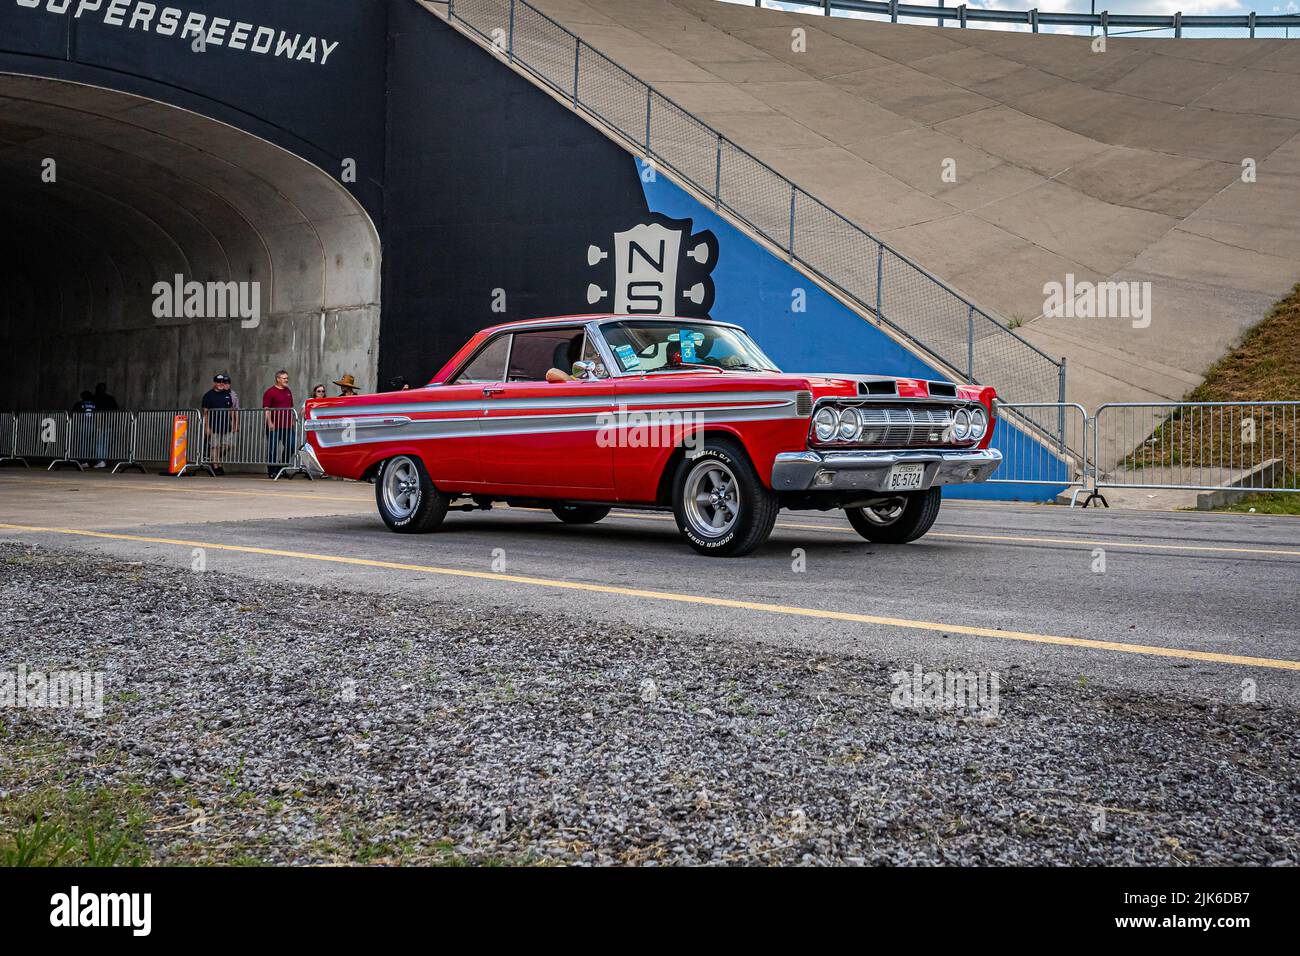 Lebanon, TN - May 14, 2022: Wide angle front corner view of a customized 1964 Mercury Comet Caliente Hardtop Sedan leaving a local car show. Stock Photo